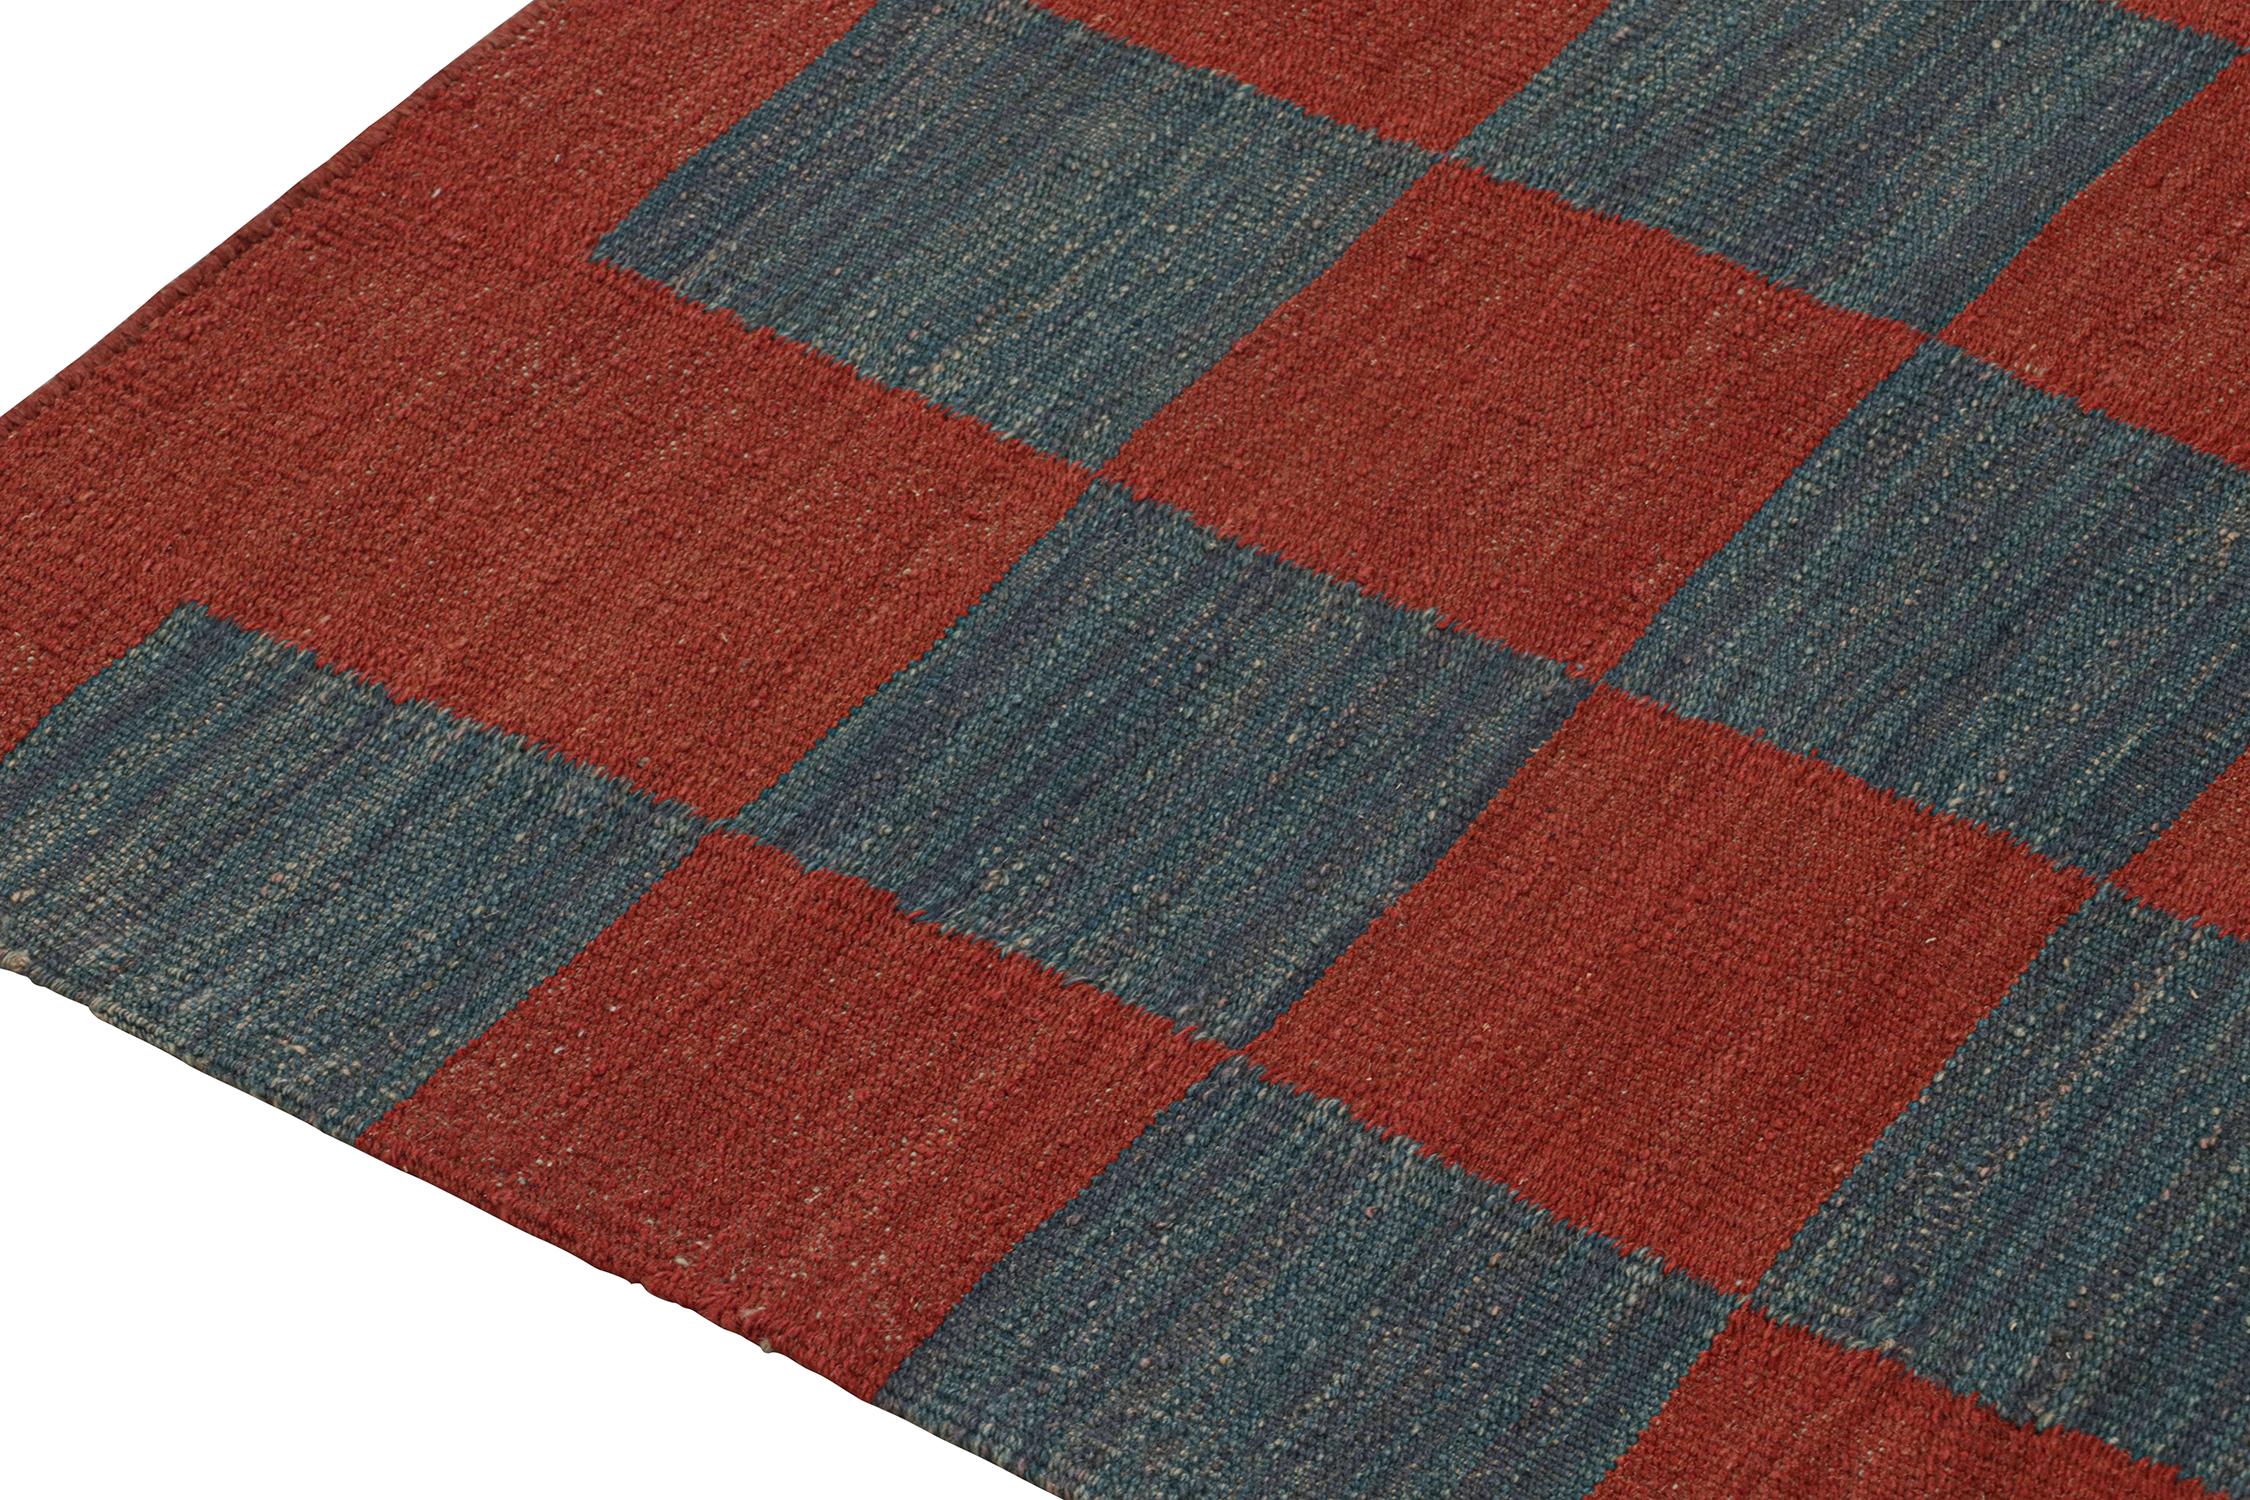 Vintage Persian Kilim Runner in Red & Blue Checkerboard Pattern by Rug & Kilim In Good Condition For Sale In Long Island City, NY